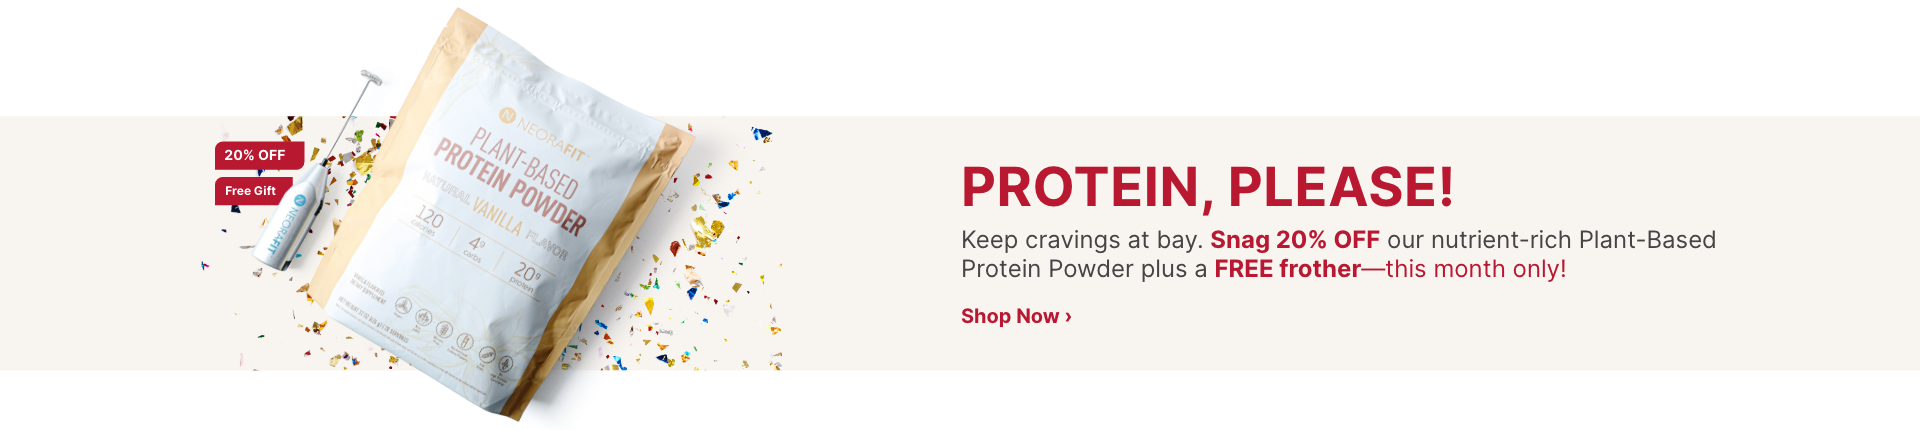 NeoraFit Plant-Based Protein Powder with FREE Frother on confetti